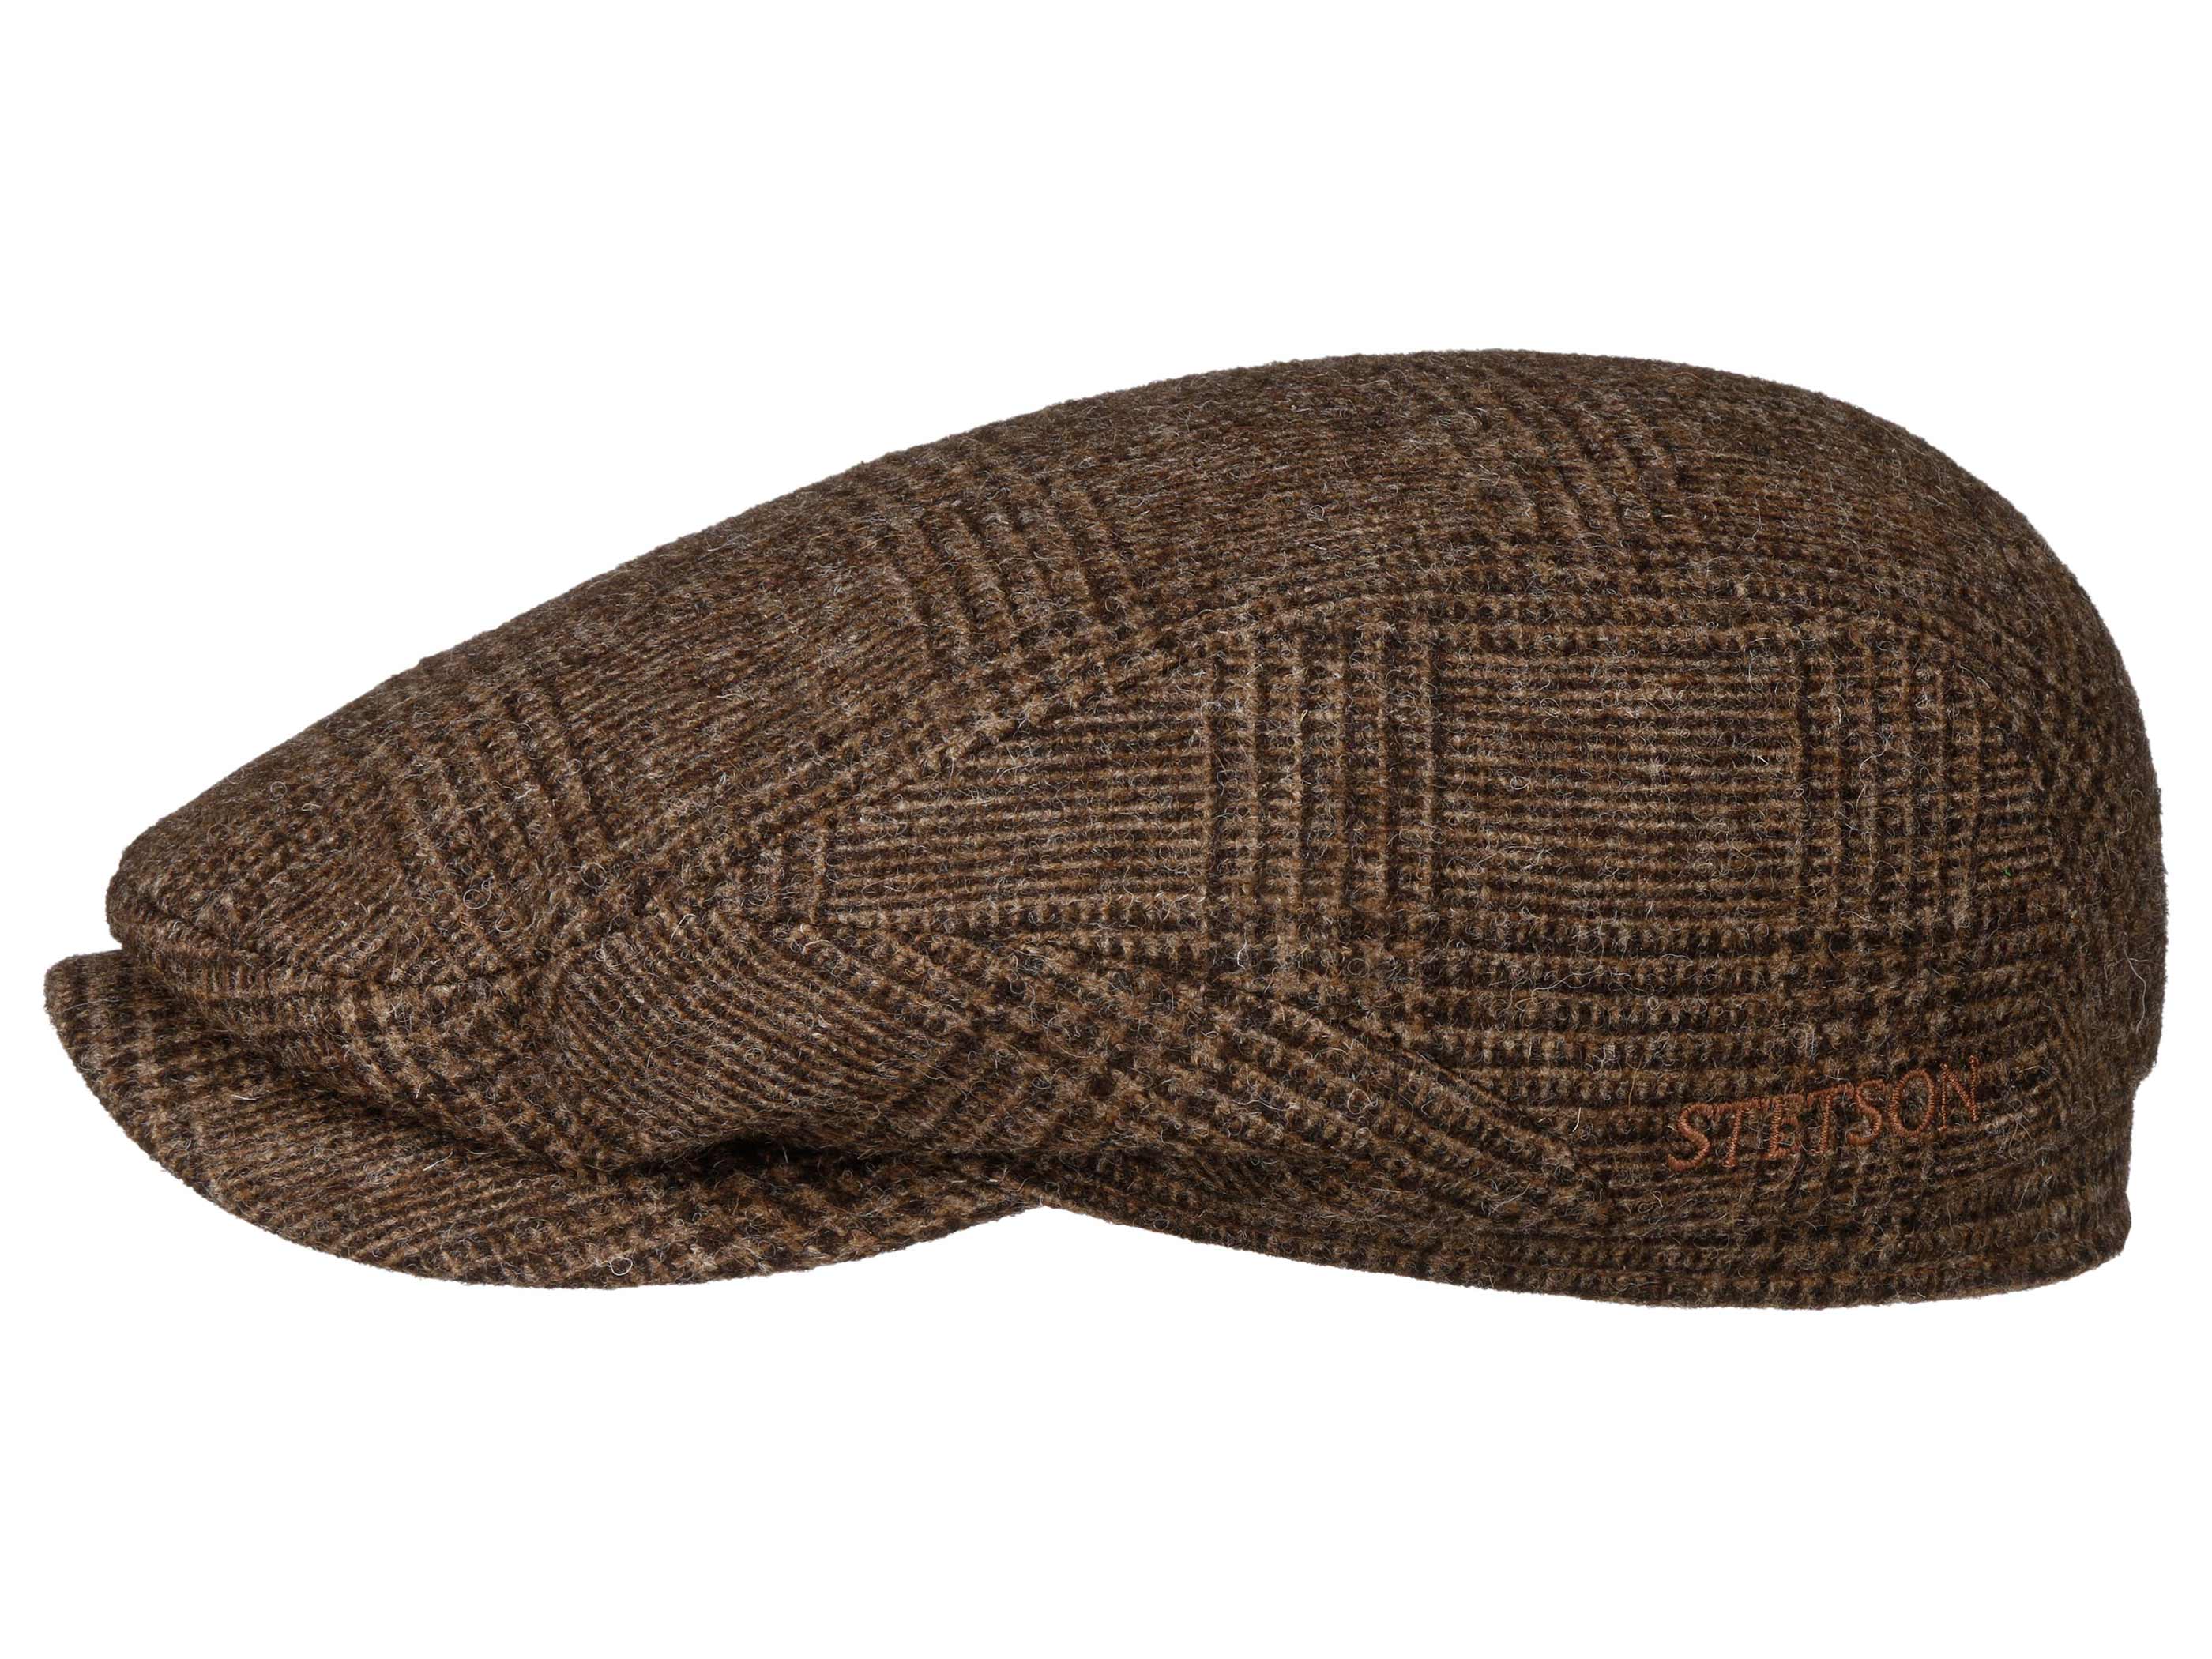 Stetson Driver Cap Sustainable Glencheck Undyed Wool Flatcap